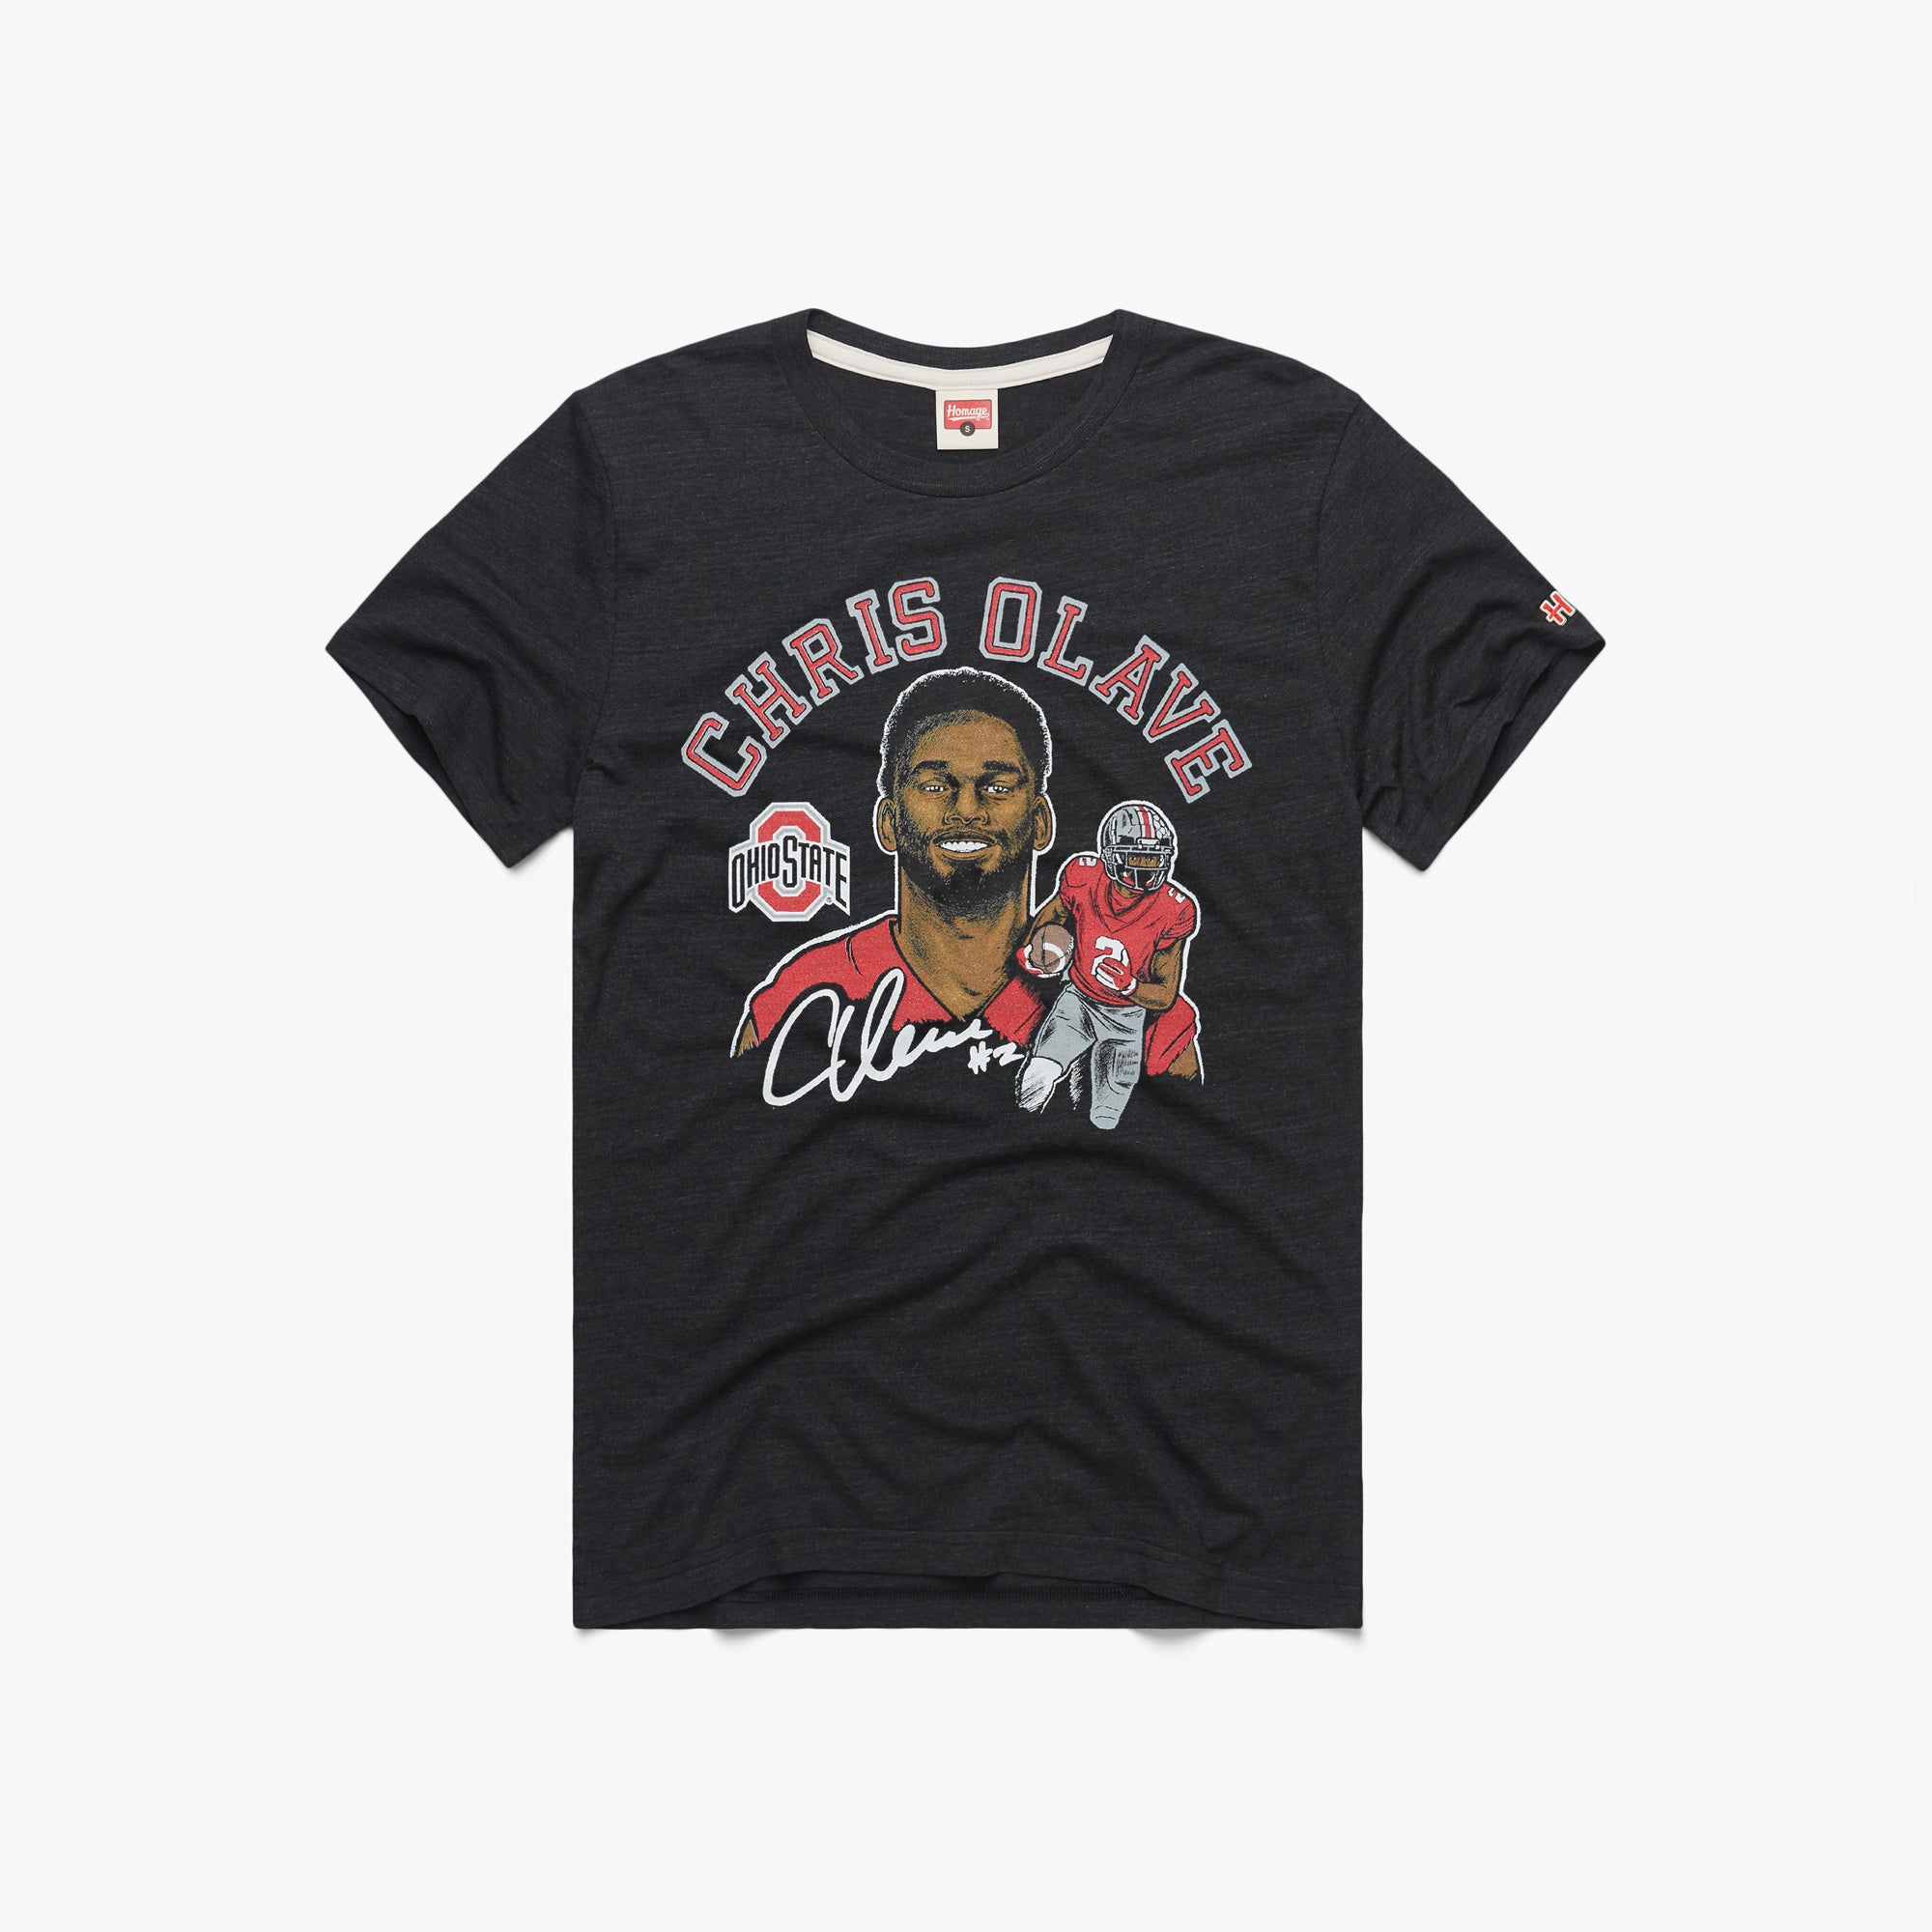 Chris Olave Ohio State T-Shirt from Homage. | Officially Licensed Ohio State Gear | Charcoal | Ohio State Vintage Apparel from Homage.